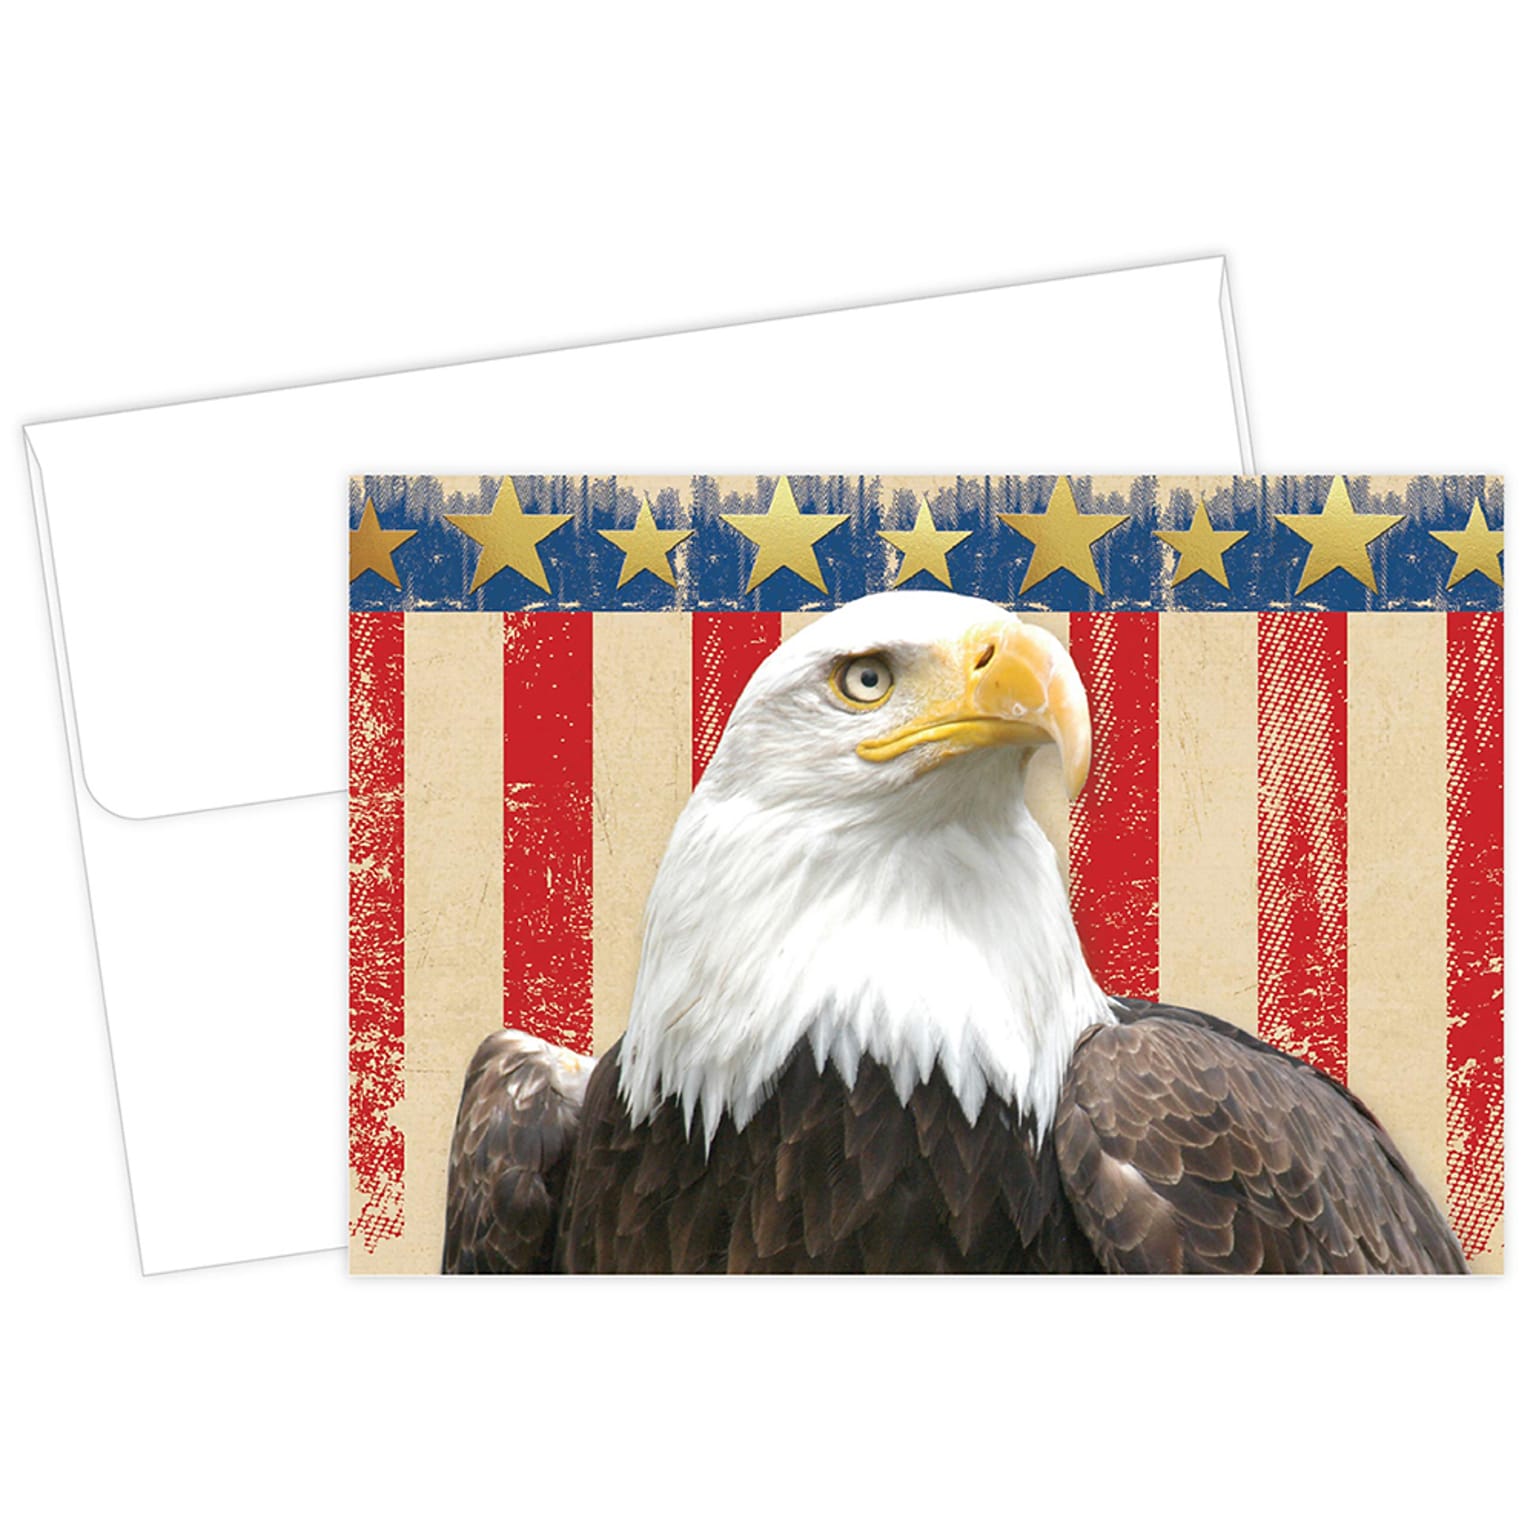 Masterpiece Studios Great Papers!® Patriotic with Gold Foil Note Card, 4.875H x 3.35W (folded), 20 count (2017049)